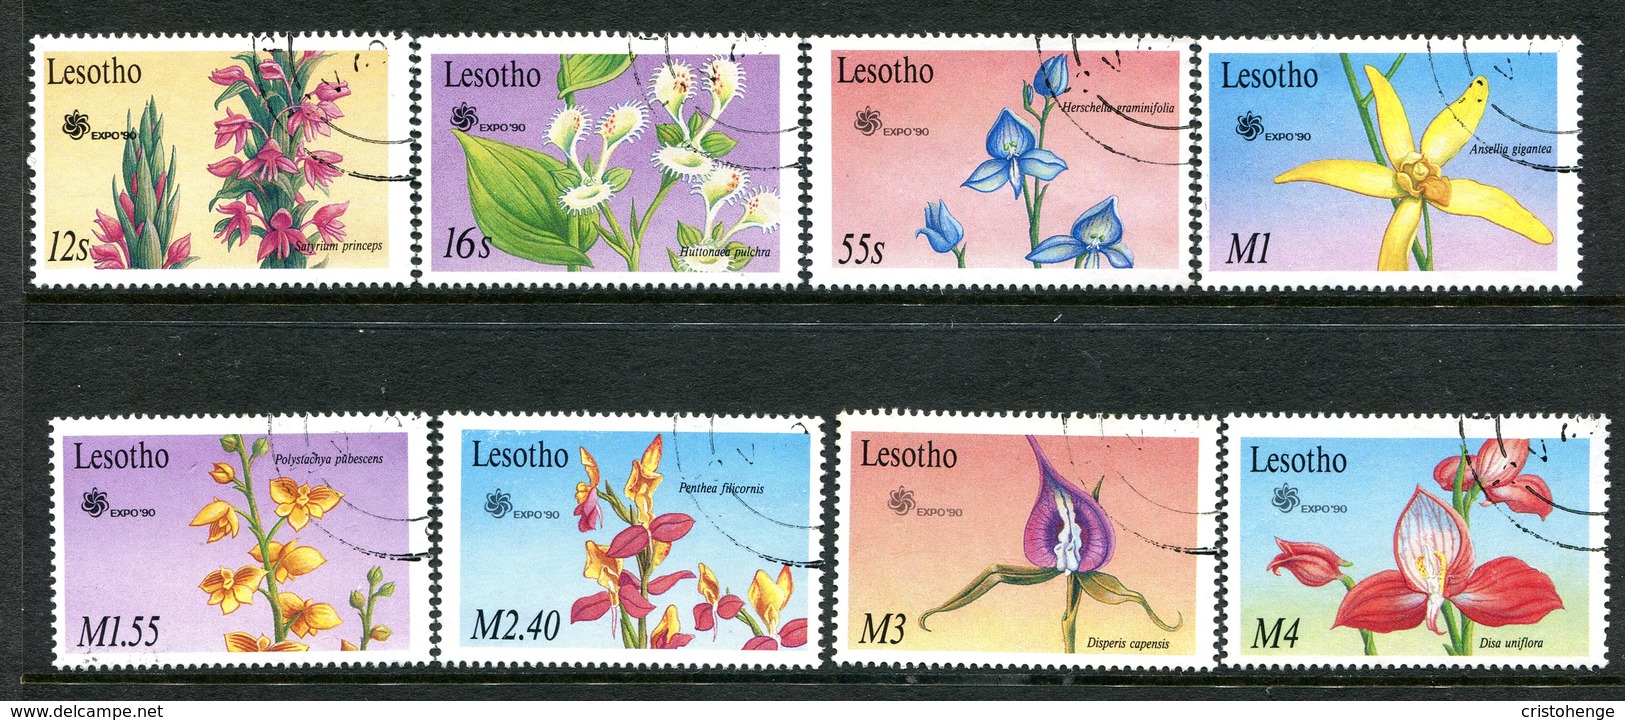 Lesotho 1990 EXPO '90 - Local Orchids Set Used (SG 958-965) - Lesotho (1966-...)